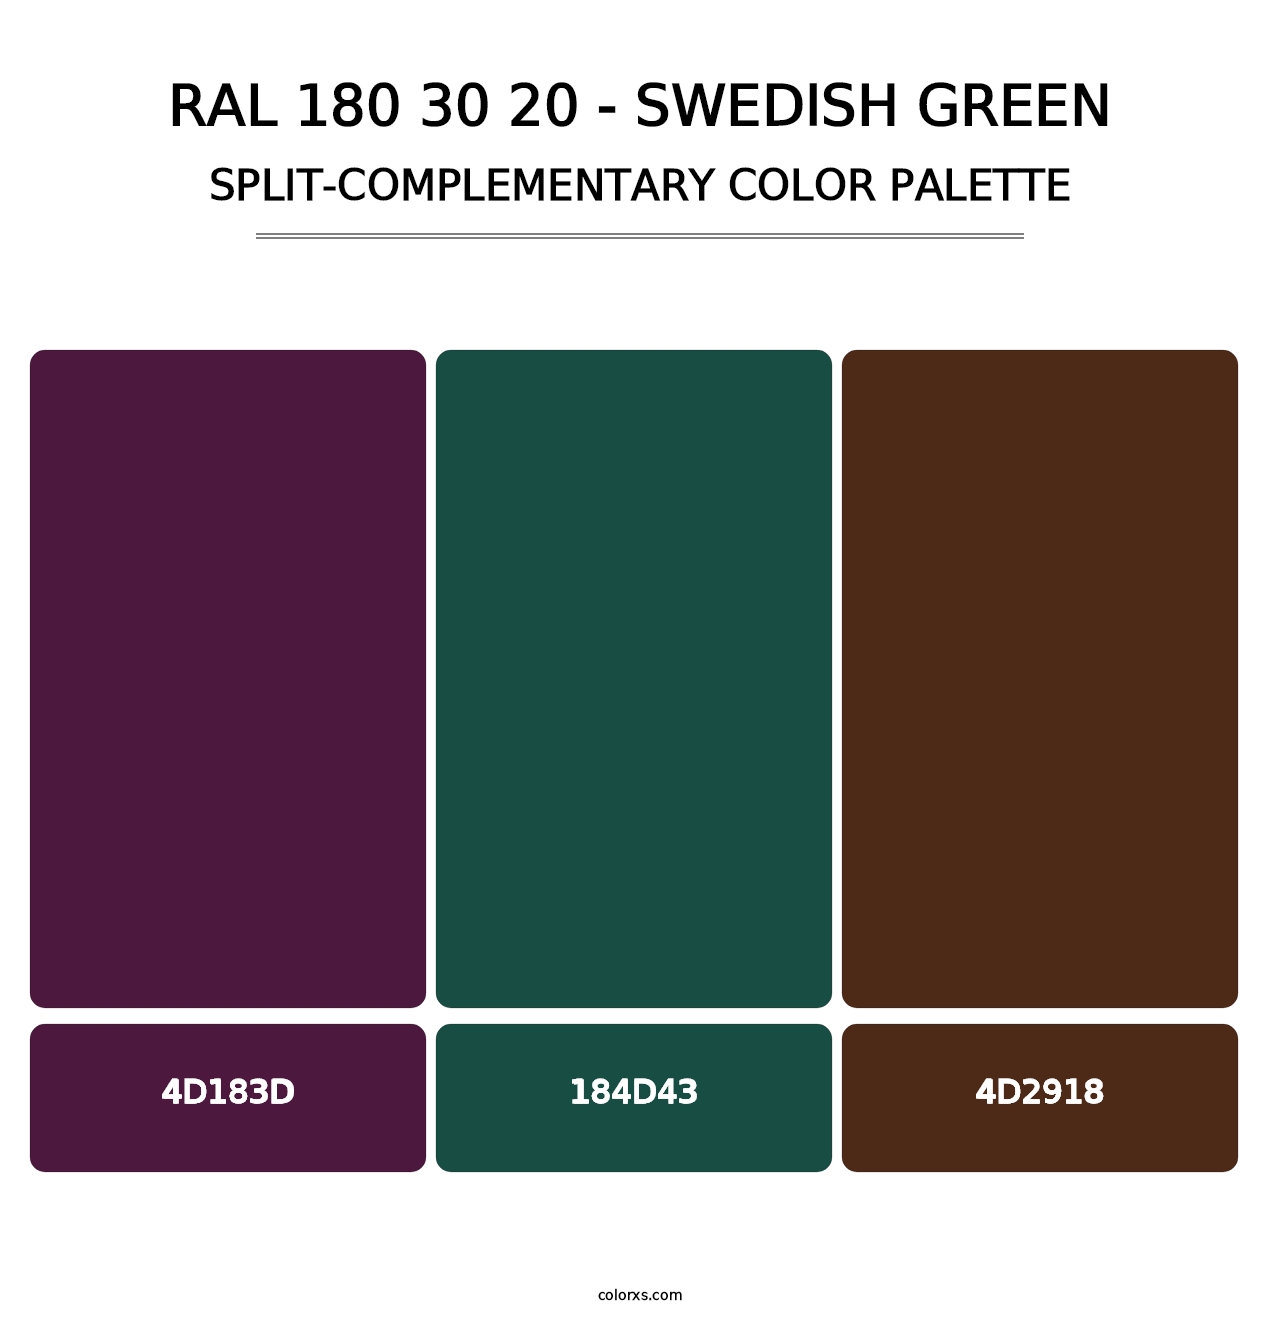 RAL 180 30 20 - Swedish Green - Split-Complementary Color Palette